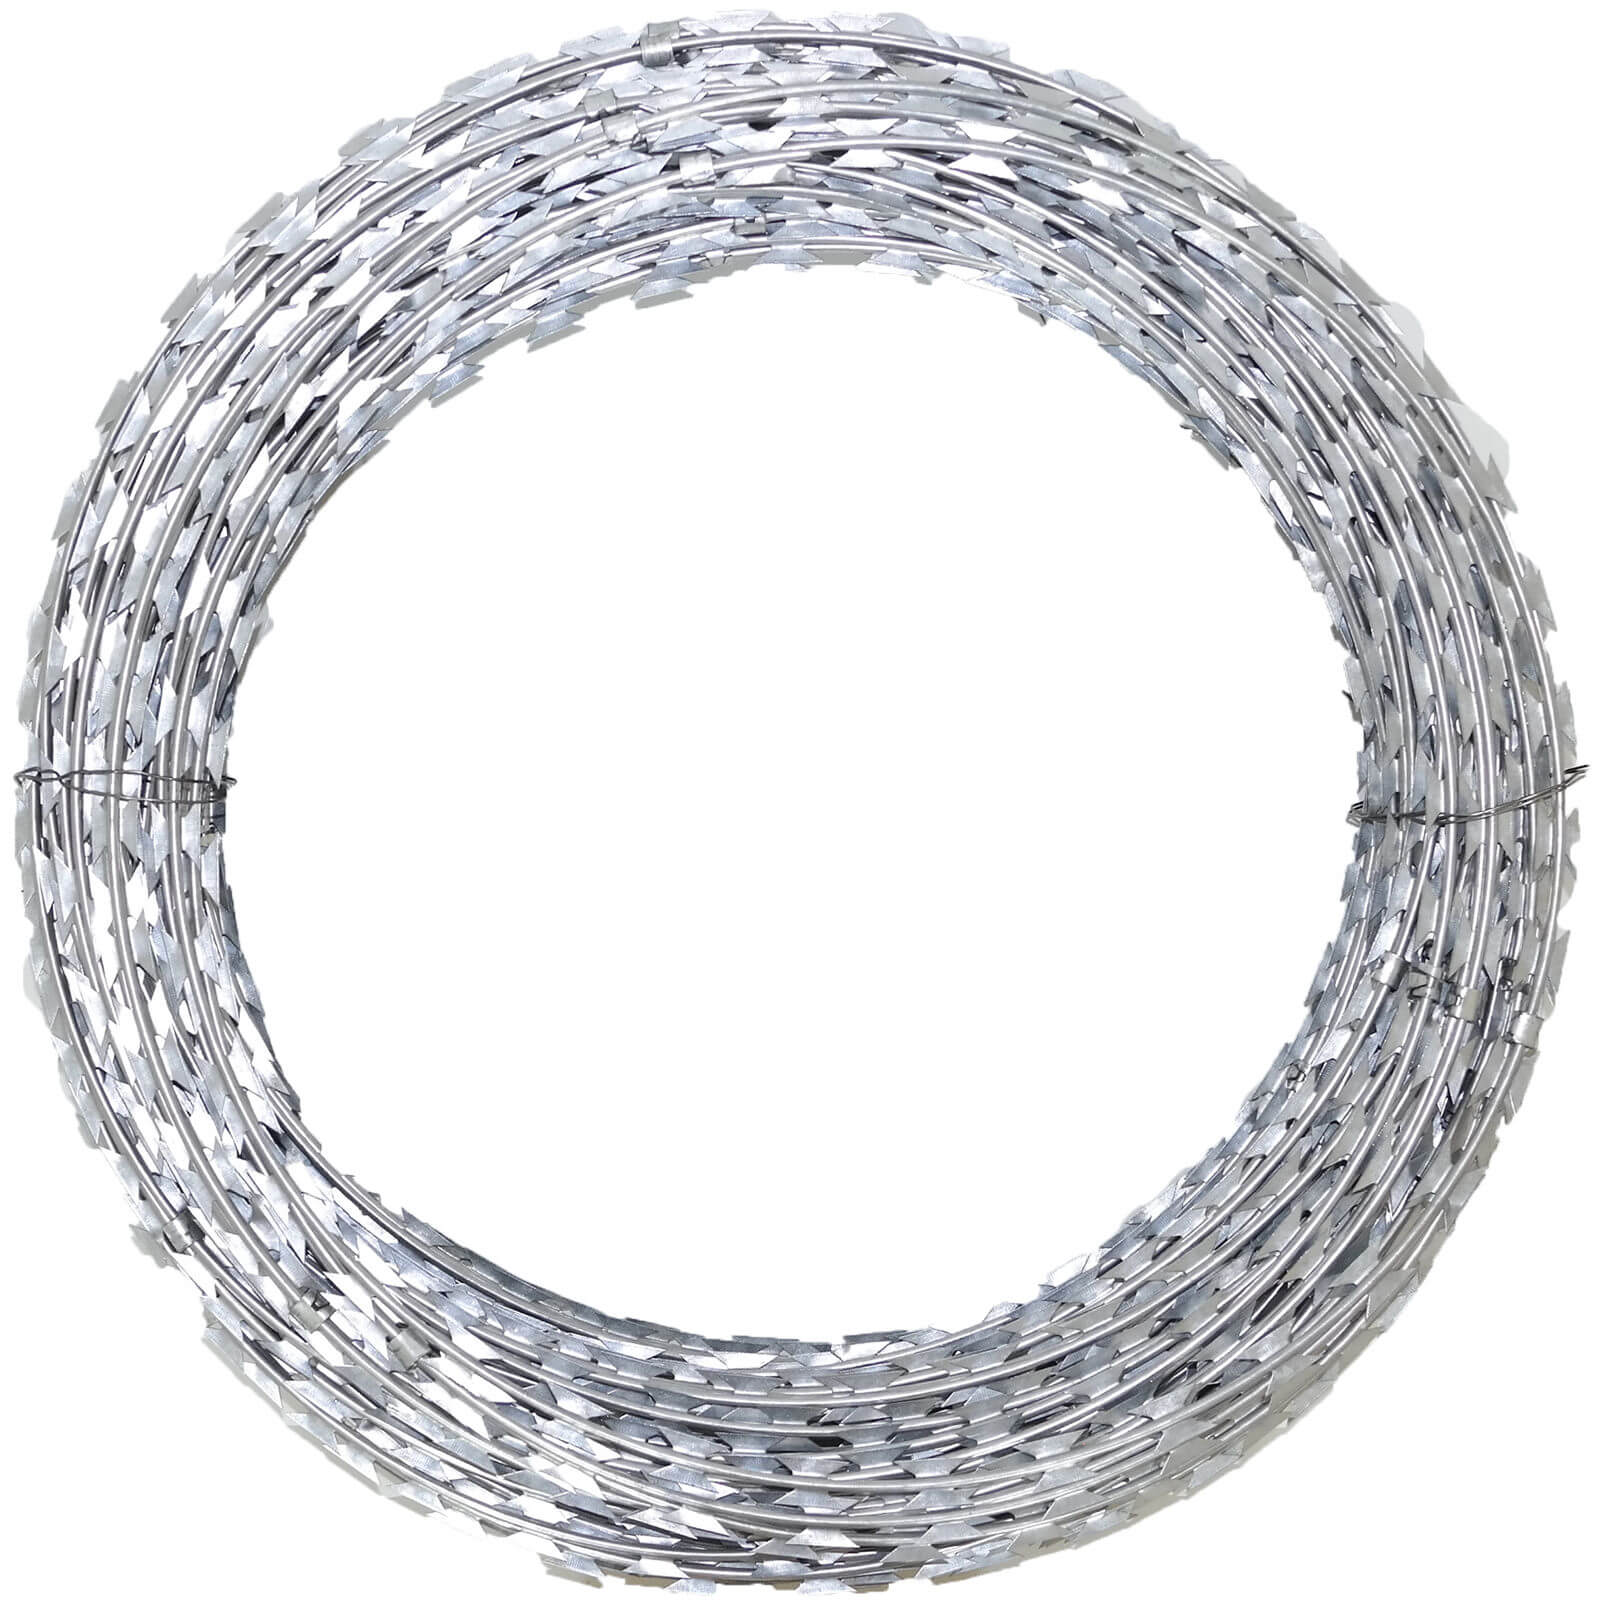 Wel: A Leading Provider of Razor Wire Fencing